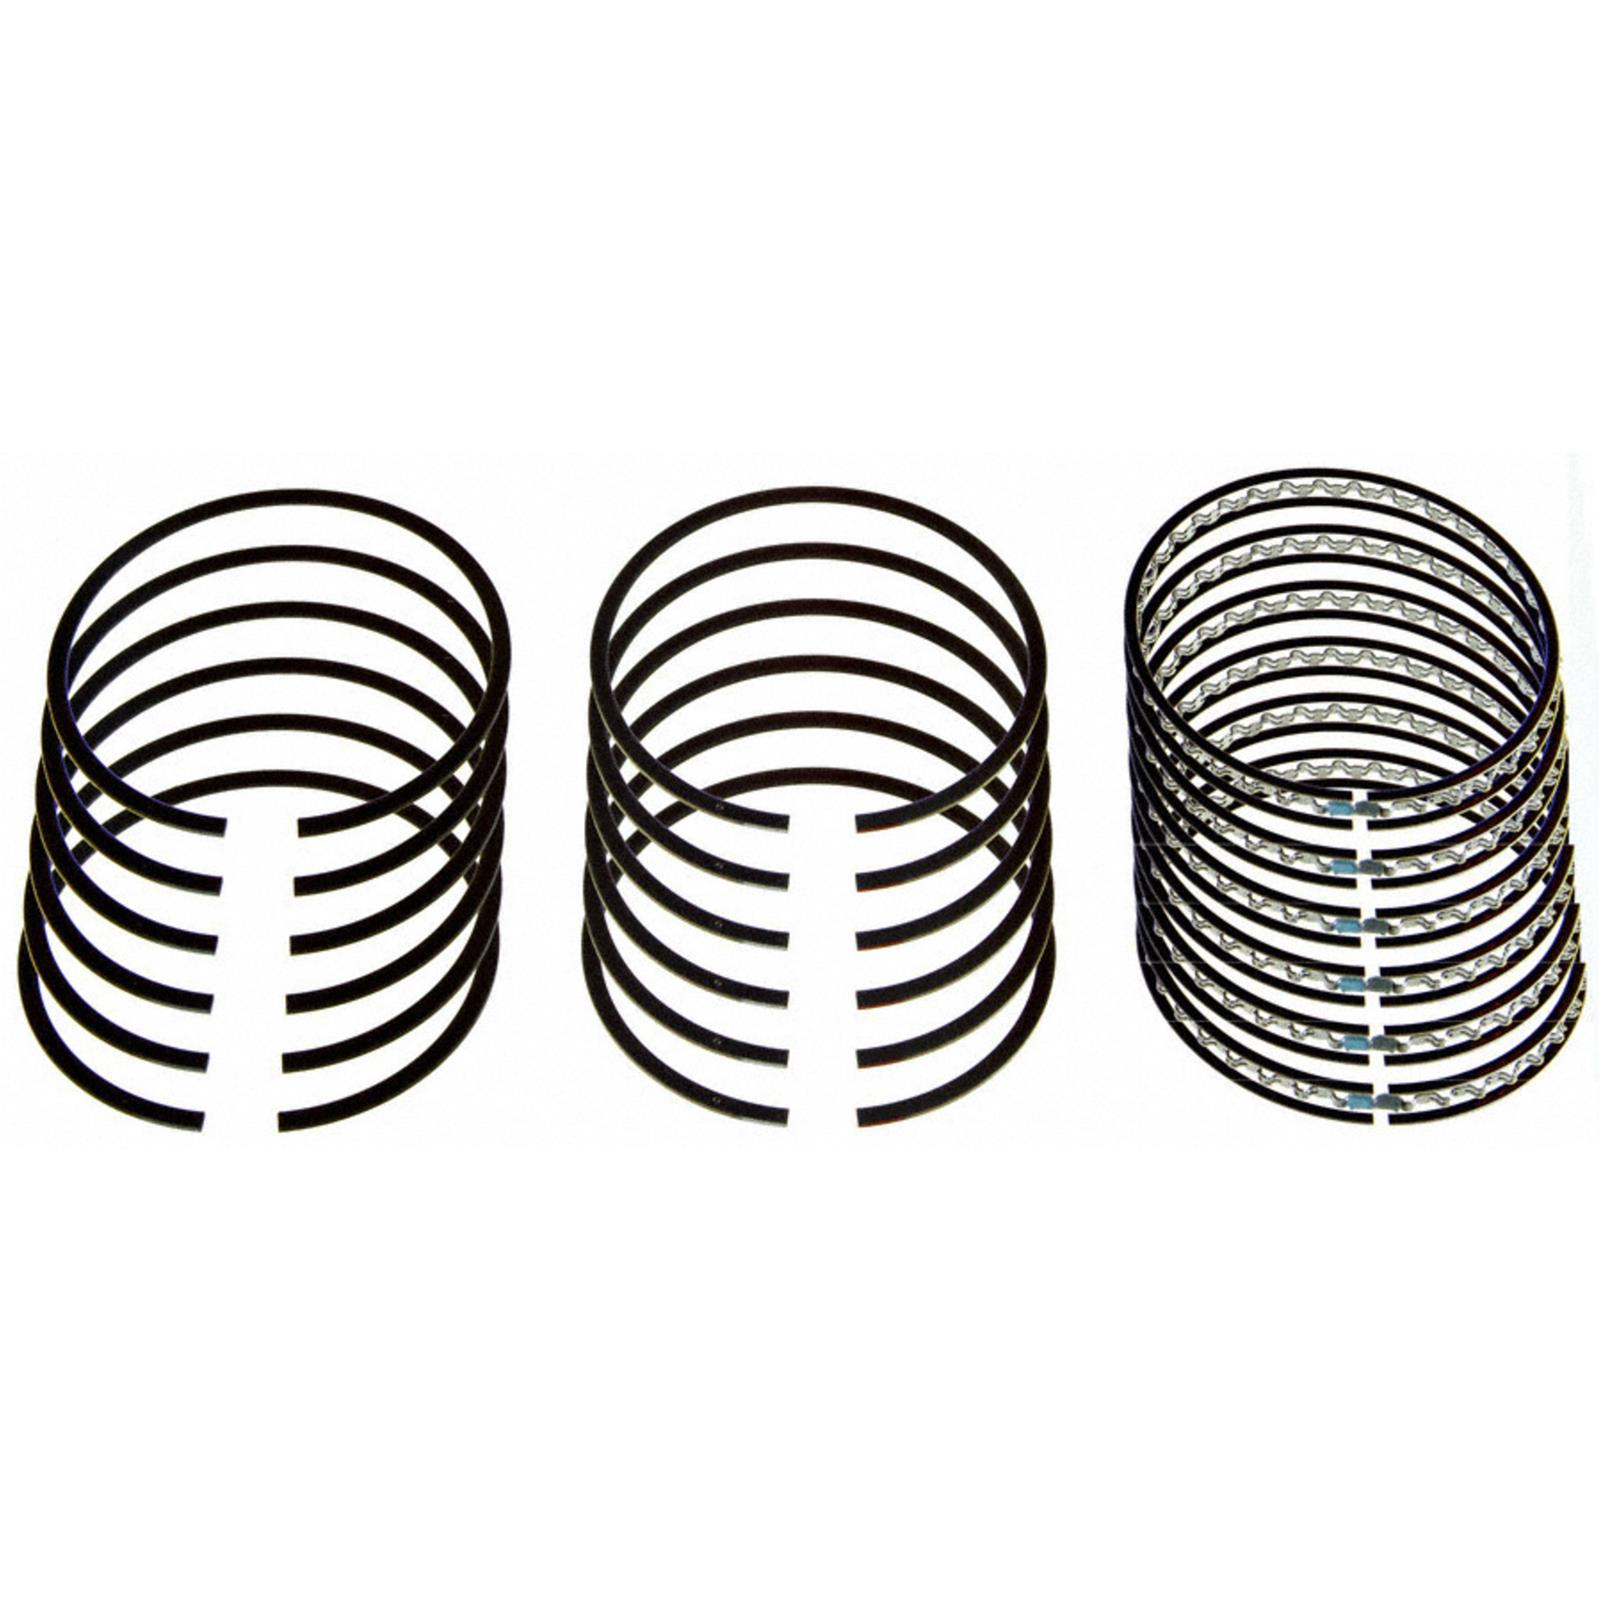 What are piston rings and the function of them?